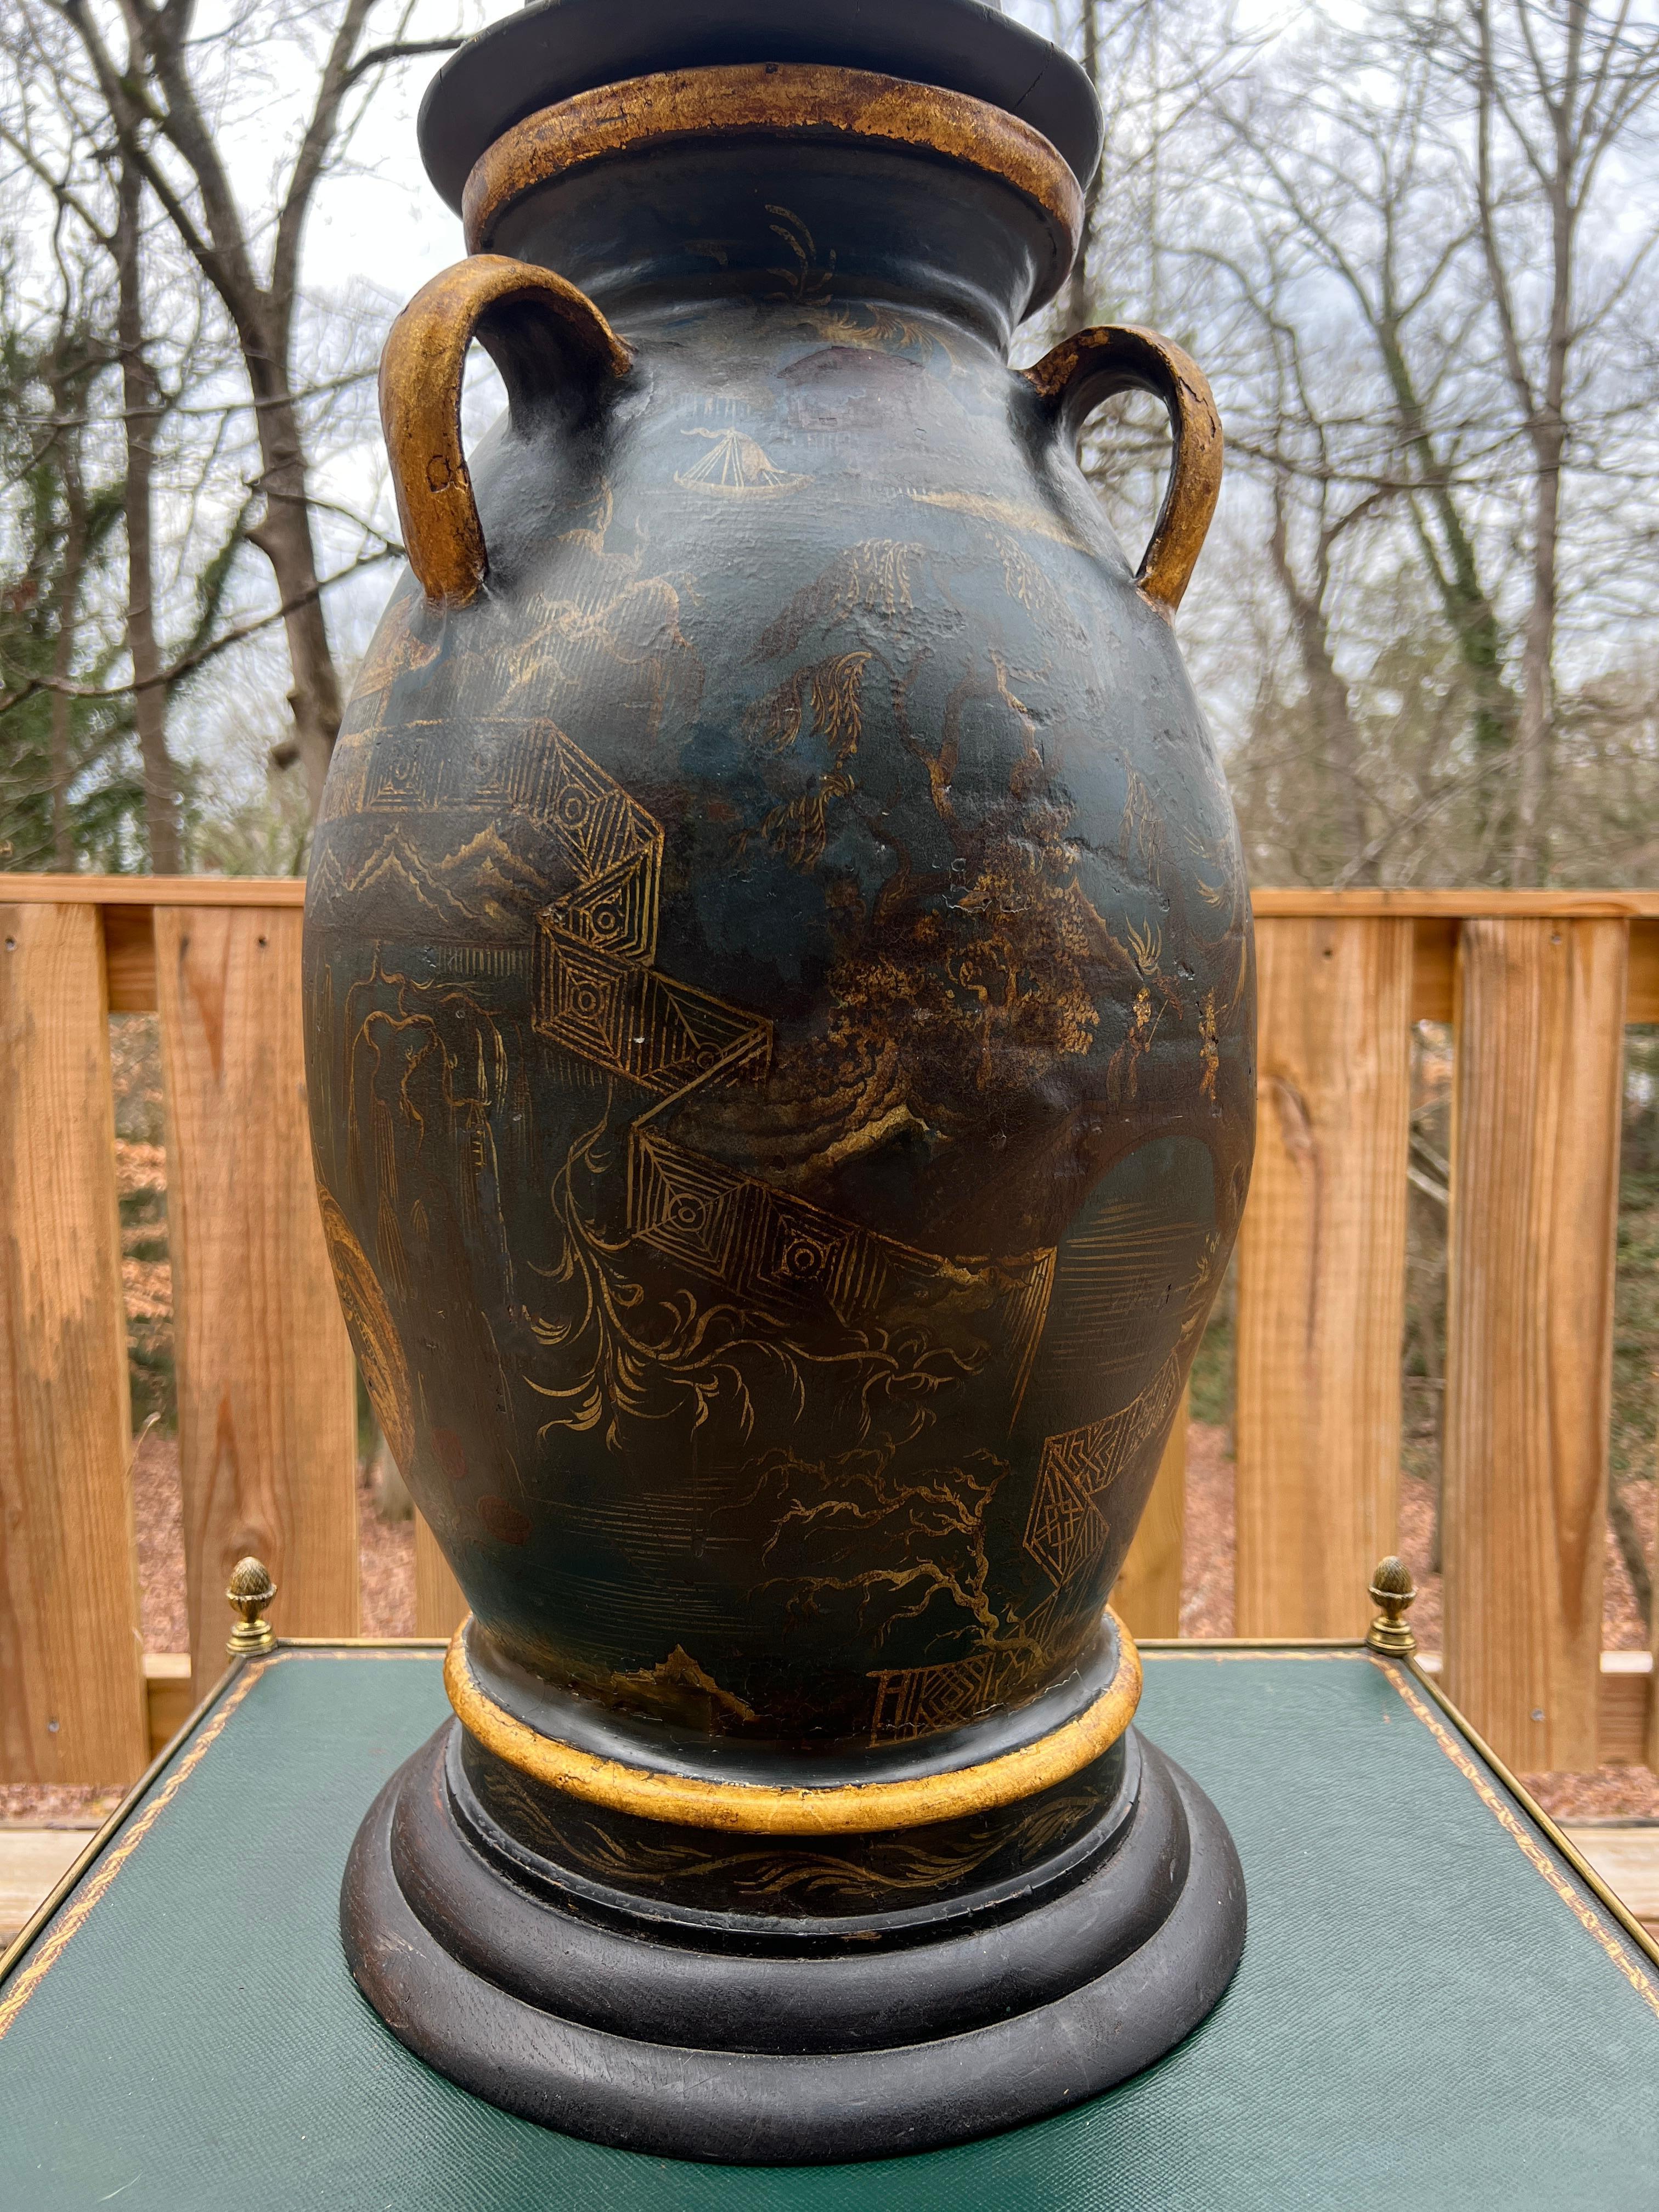 19th Century Regency Chinoiserie Decorated Gilt Wood & Tole Handled Urn or Centerpiece C 1820 For Sale